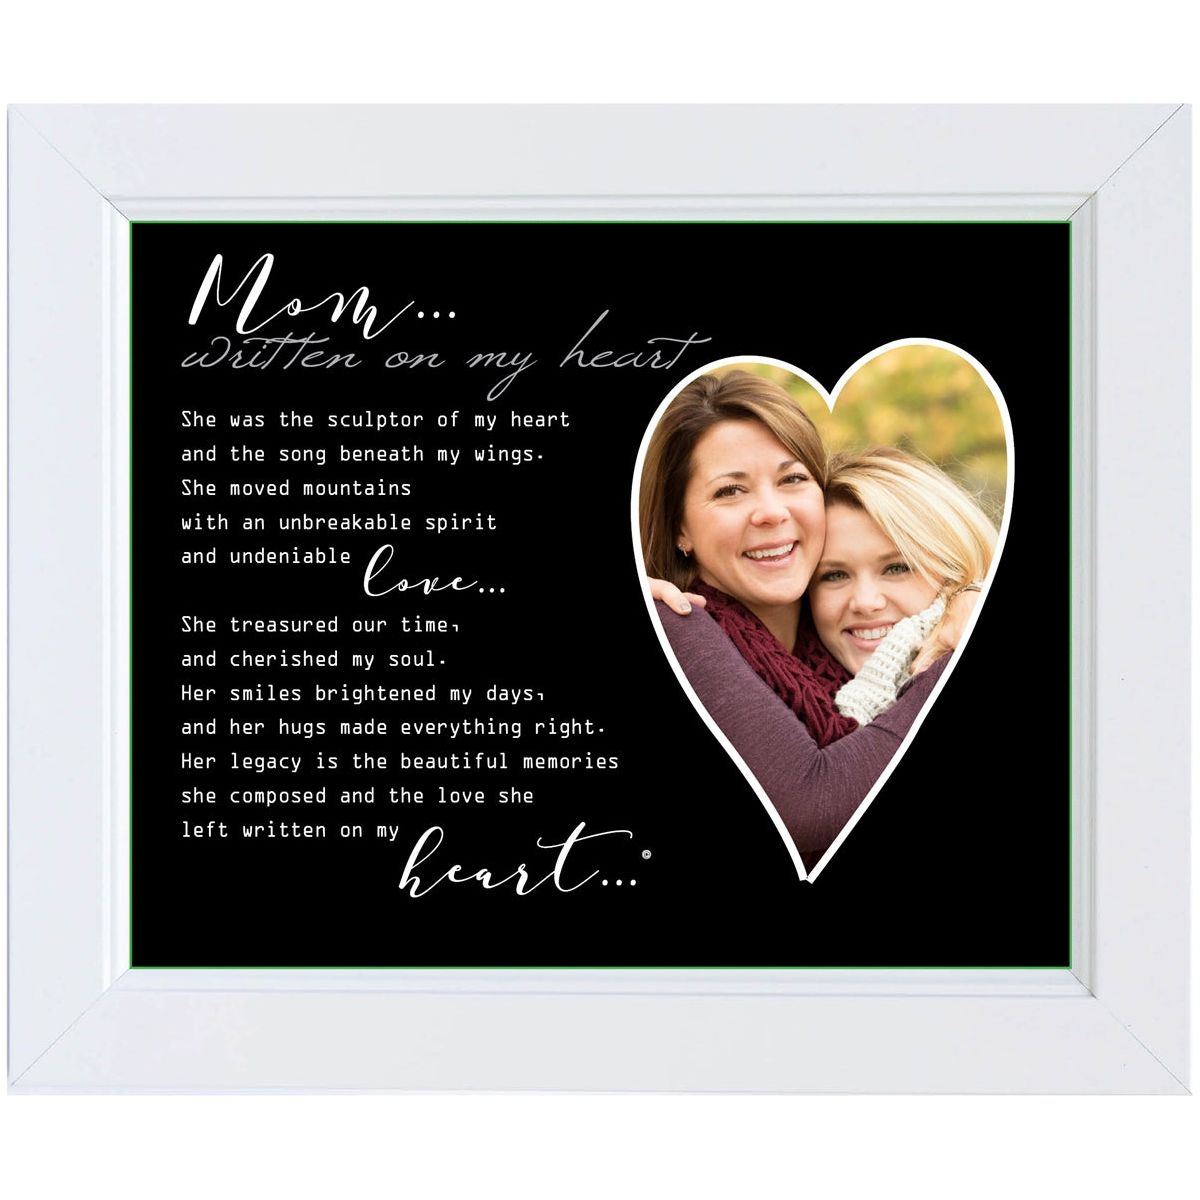 Mom Written on my Heart: Remembrance Gift for Mom Loss